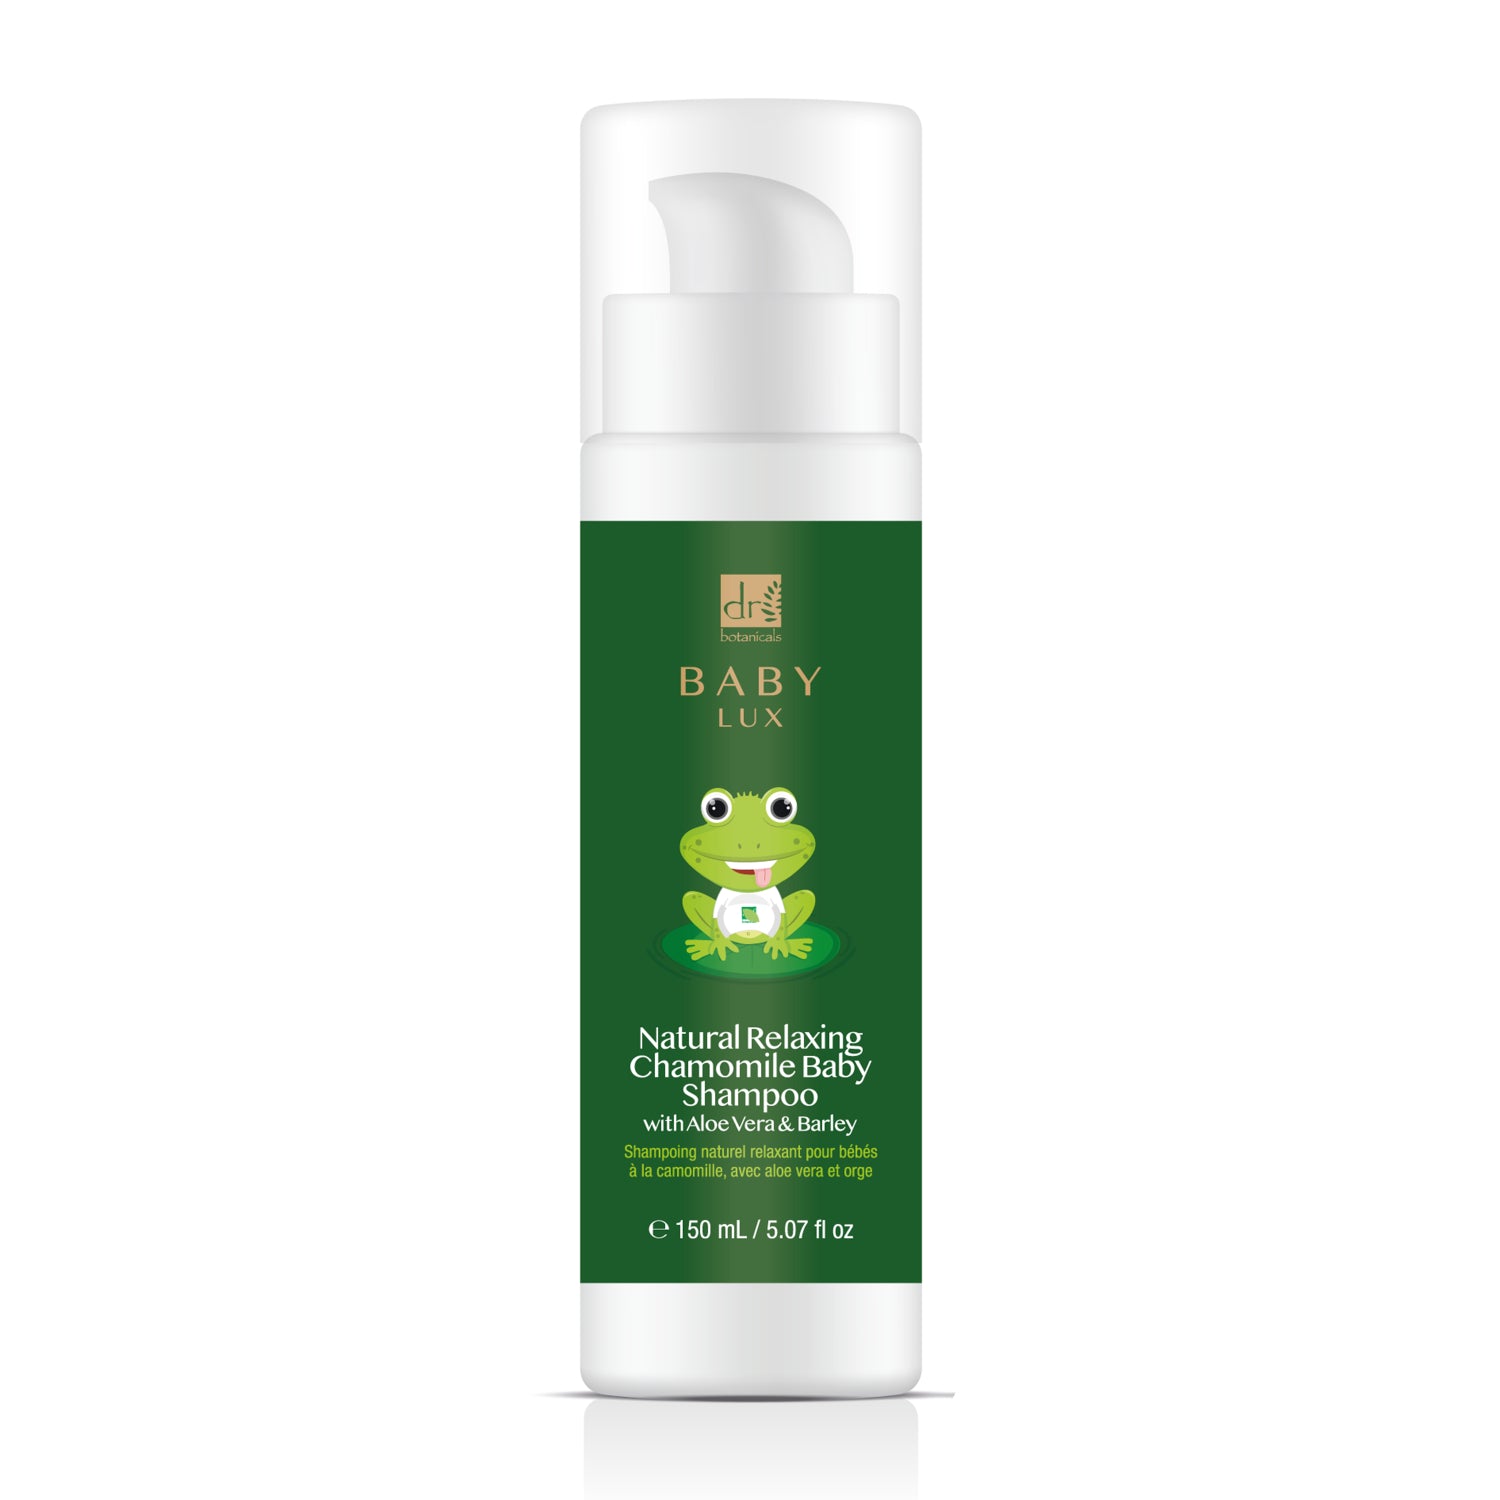 Baby Lux Natural Relaxing Chamomile Baby Shampoo 150ml